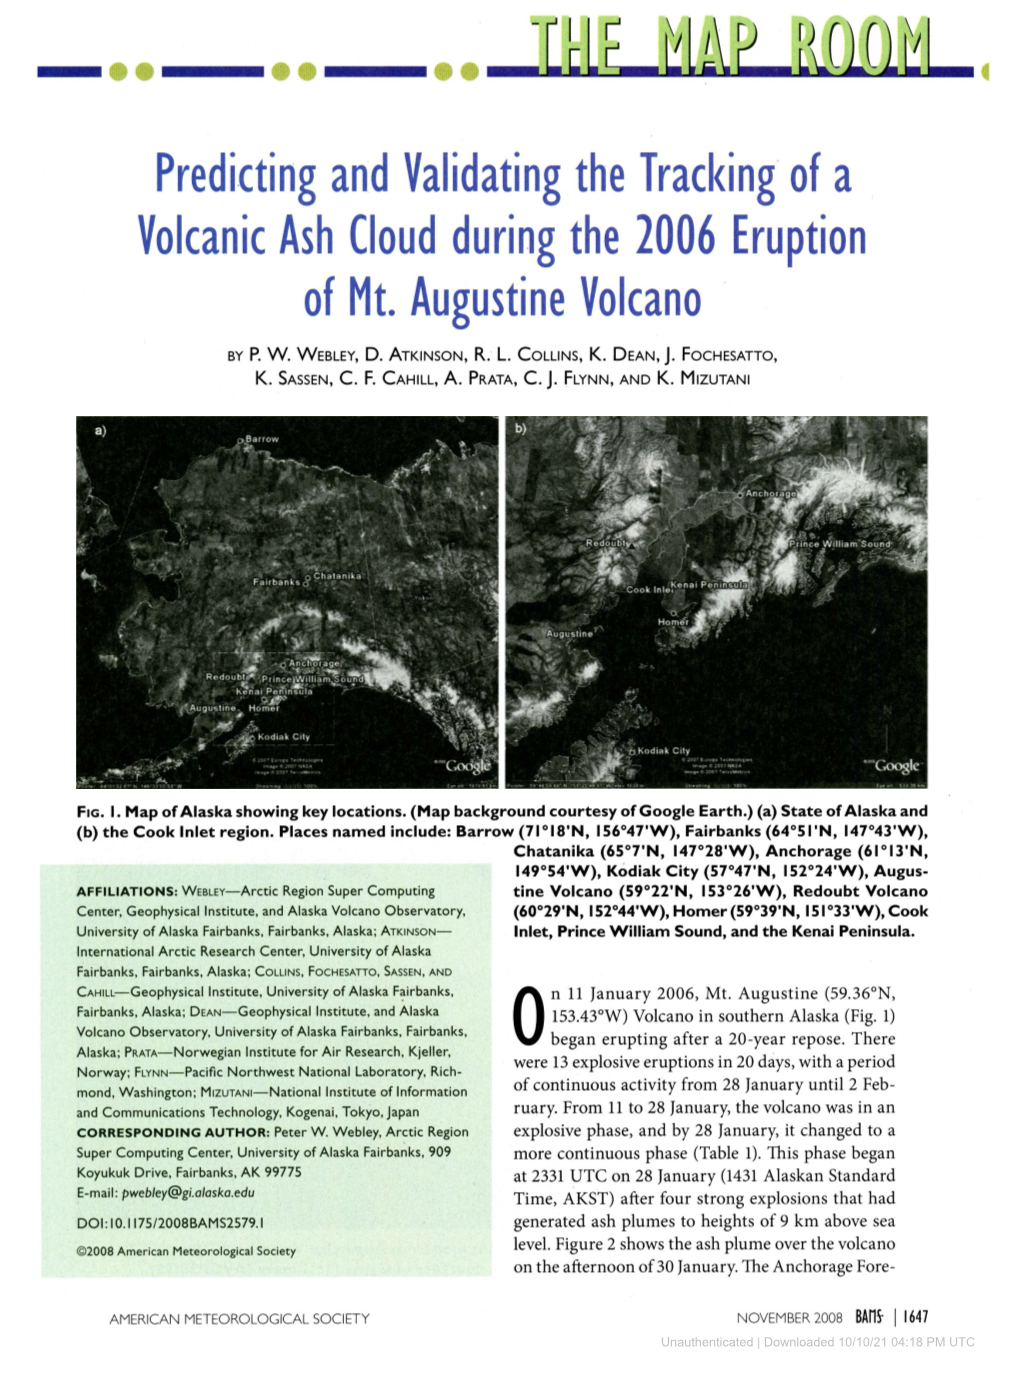 Predicting and Validating the Tracking of a Volcanic Ash Cloud During the 2006 Eruption of Mt. Augustine Volcano 0